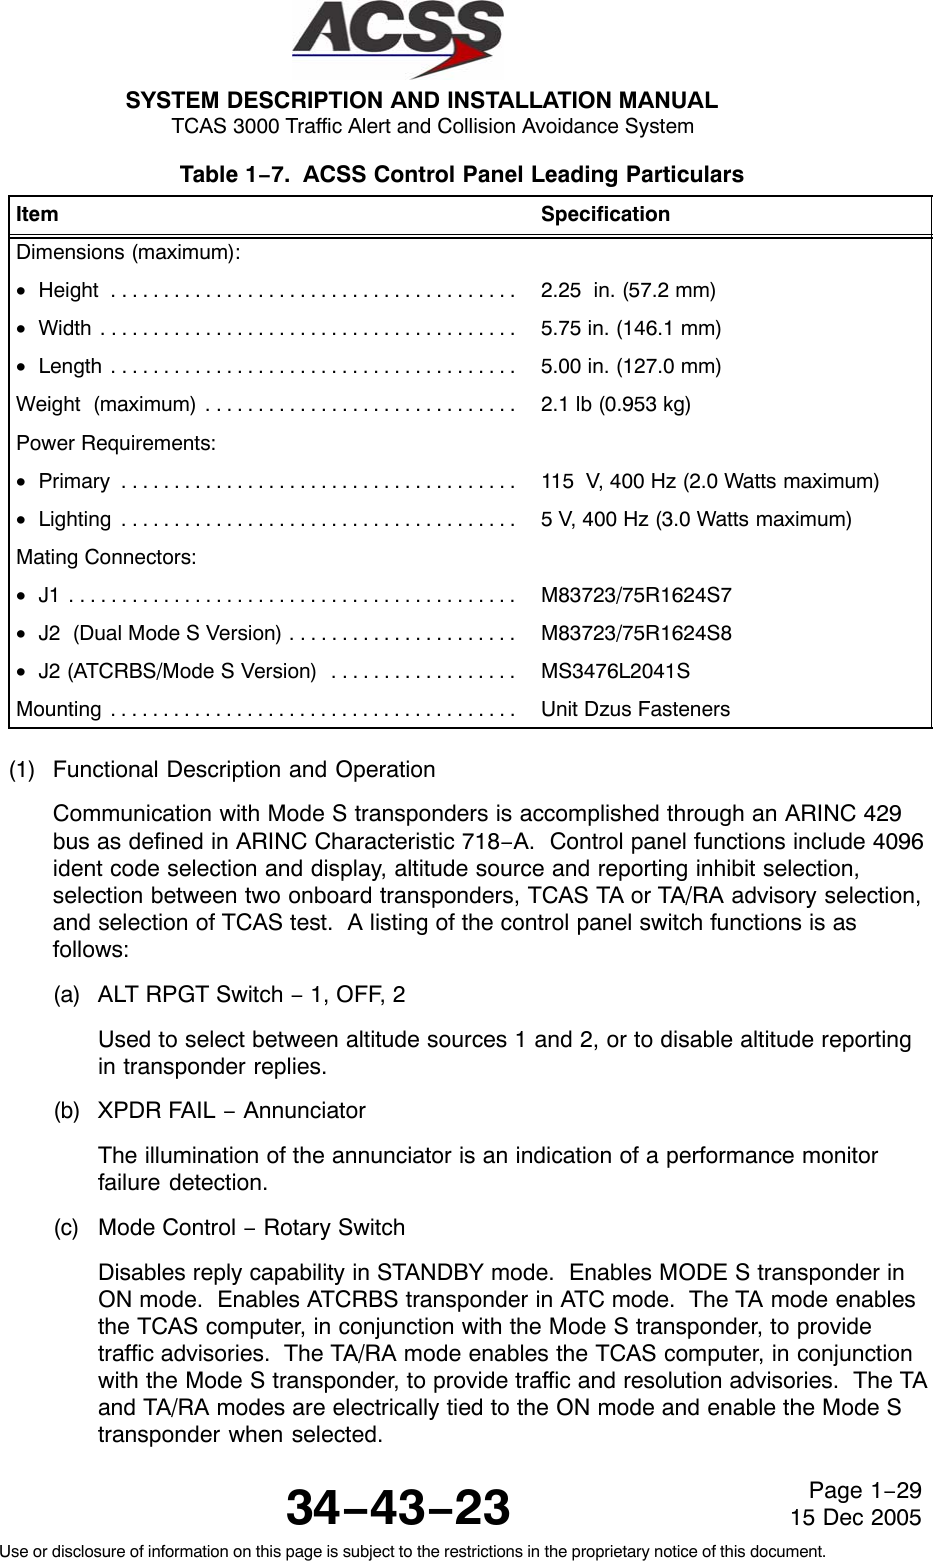 SYSTEM DESCRIPTION AND INSTALLATION MANUAL TCAS 3000 Traffic Alert and Collision Avoidance System34−43−23Use or disclosure of information on this page is subject to the restrictions in the proprietary notice of this document.Page 1−2915 Dec 2005Table 1−7.  ACSS Control Panel Leading Particulars  Item SpecificationDimensions (maximum):•Height . . . . . . . . . . . . . . . . . . . . . . . . . . . . . . . . . . . . . . .  2.25  in. (57.2 mm)•Width . . . . . . . . . . . . . . . . . . . . . . . . . . . . . . . . . . . . . . . .  5.75 in. (146.1 mm)•Length . . . . . . . . . . . . . . . . . . . . . . . . . . . . . . . . . . . . . . .  5.00 in. (127.0 mm)Weight  (maximum) . . . . . . . . . . . . . . . . . . . . . . . . . . . . . .  2.1 lb (0.953 kg)Power Requirements:•Primary . . . . . . . . . . . . . . . . . . . . . . . . . . . . . . . . . . . . . .  115  V, 400 Hz (2.0 Watts maximum)•Lighting . . . . . . . . . . . . . . . . . . . . . . . . . . . . . . . . . . . . . .  5 V, 400 Hz (3.0 Watts maximum)Mating Connectors:•J1 . . . . . . . . . . . . . . . . . . . . . . . . . . . . . . . . . . . . . . . . . . .  M83723/75R1624S7•J2  (Dual Mode S Version) . . . . . . . . . . . . . . . . . . . . . .  M83723/75R1624S8•J2 (ATCRBS/Mode S Version) . . . . . . . . . . . . . . . . . .  MS3476L2041SMounting . . . . . . . . . . . . . . . . . . . . . . . . . . . . . . . . . . . . . . .  Unit Dzus Fasteners(1) Functional Description and OperationCommunication with Mode S transponders is accomplished through an ARINC 429bus as defined in ARINC Characteristic 718−A.  Control panel functions include 4096ident code selection and display, altitude source and reporting inhibit selection,selection between two onboard transponders, TCAS TA or TA/RA advisory selection,and selection of TCAS test.  A listing of the control panel switch functions is asfollows:(a) ALT RPGT Switch − 1, OFF, 2Used to select between altitude sources 1 and 2, or to disable altitude reportingin transponder replies.(b) XPDR FAIL − AnnunciatorThe illumination of the annunciator is an indication of a performance monitorfailure detection.(c) Mode Control − Rotary SwitchDisables reply capability in STANDBY mode.  Enables MODE S transponder inON mode.  Enables ATCRBS transponder in ATC mode.  The TA mode enablesthe TCAS computer, in conjunction with the Mode S transponder, to providetraffic advisories.  The TA/RA mode enables the TCAS computer, in conjunctionwith the Mode S transponder, to provide traffic and resolution advisories.  The TAand TA/RA modes are electrically tied to the ON mode and enable the Mode Stransponder when selected.